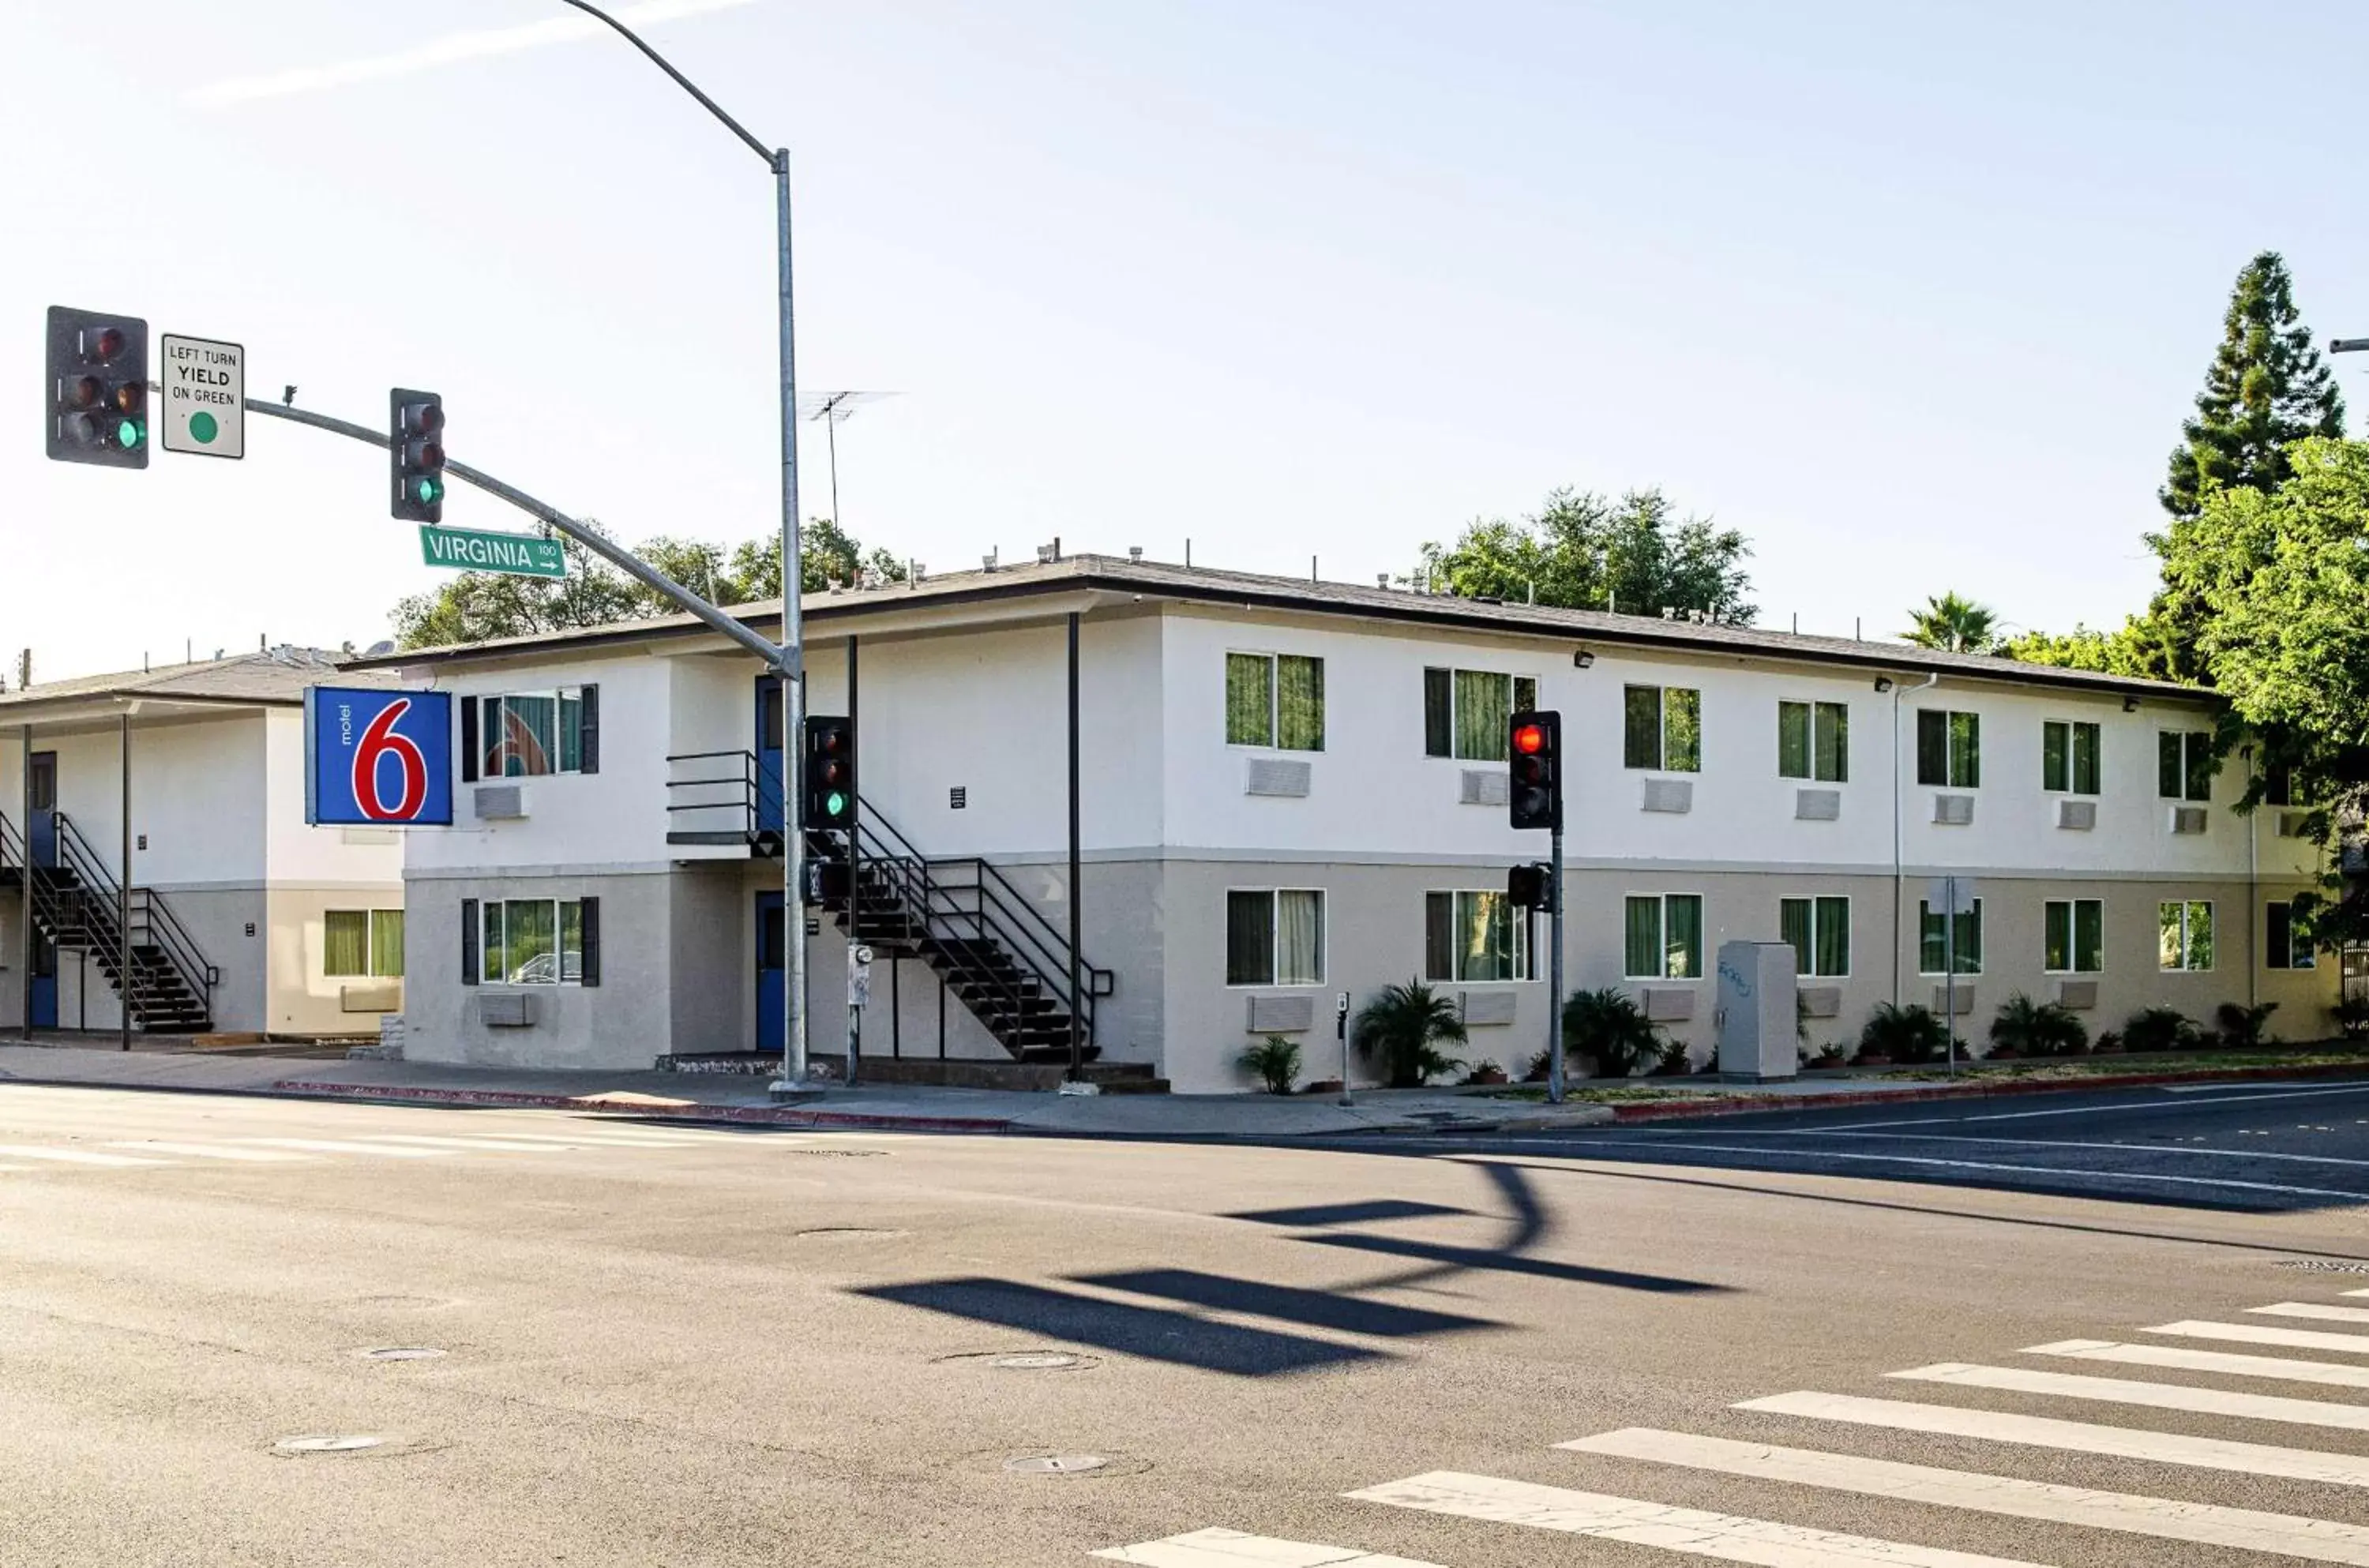 Property building in Motel 6-Modesto, CA - Downtown